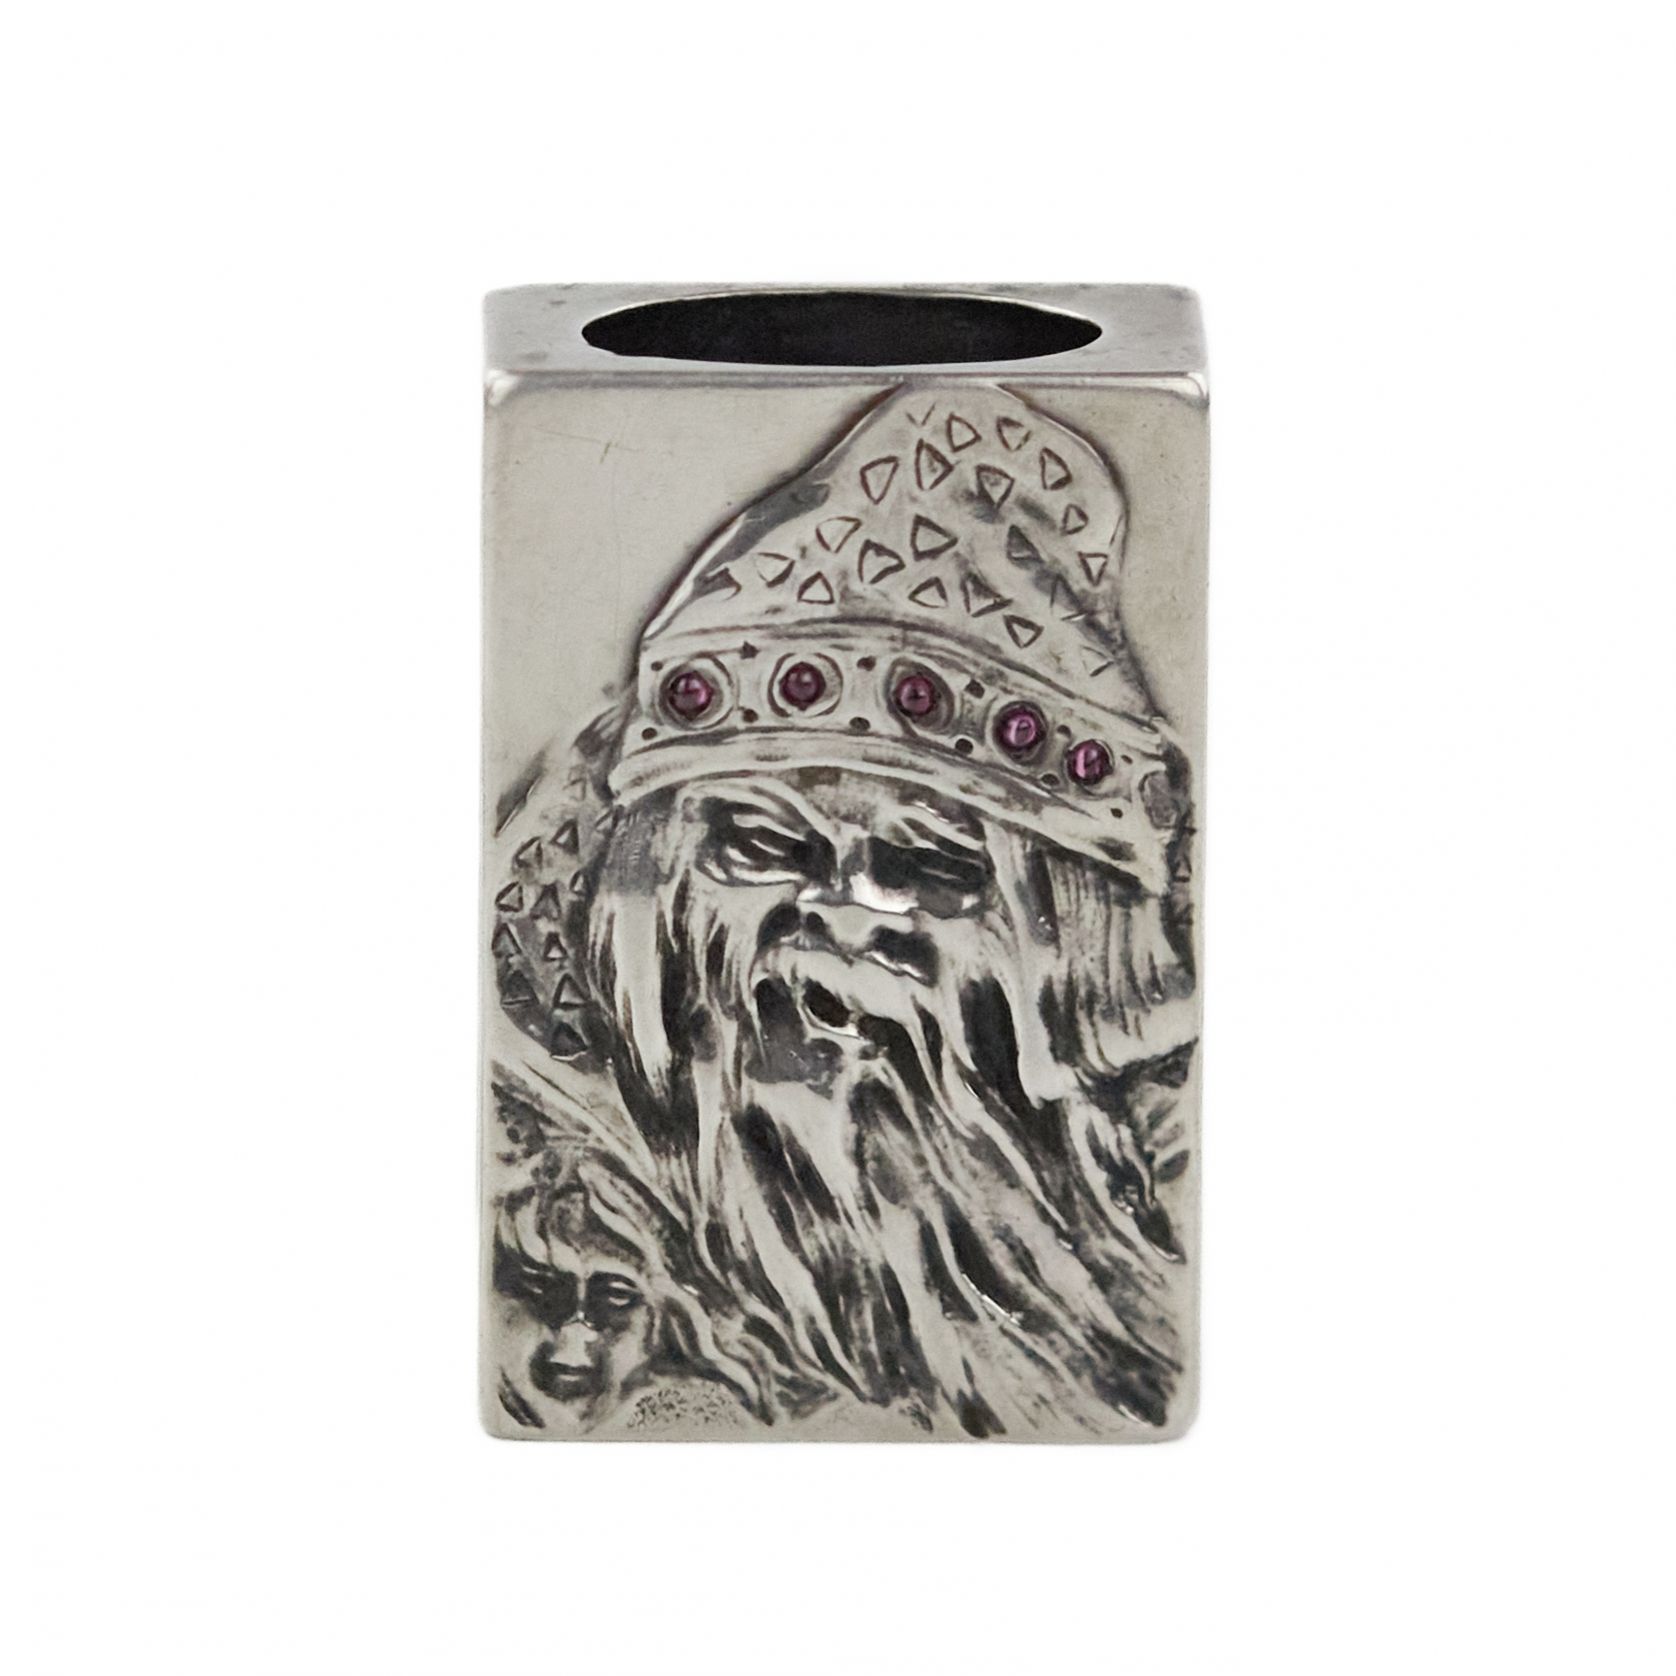 Silver match holder, made in the Russian Art Nouveau style, with the image of a goblin. - Image 2 of 6